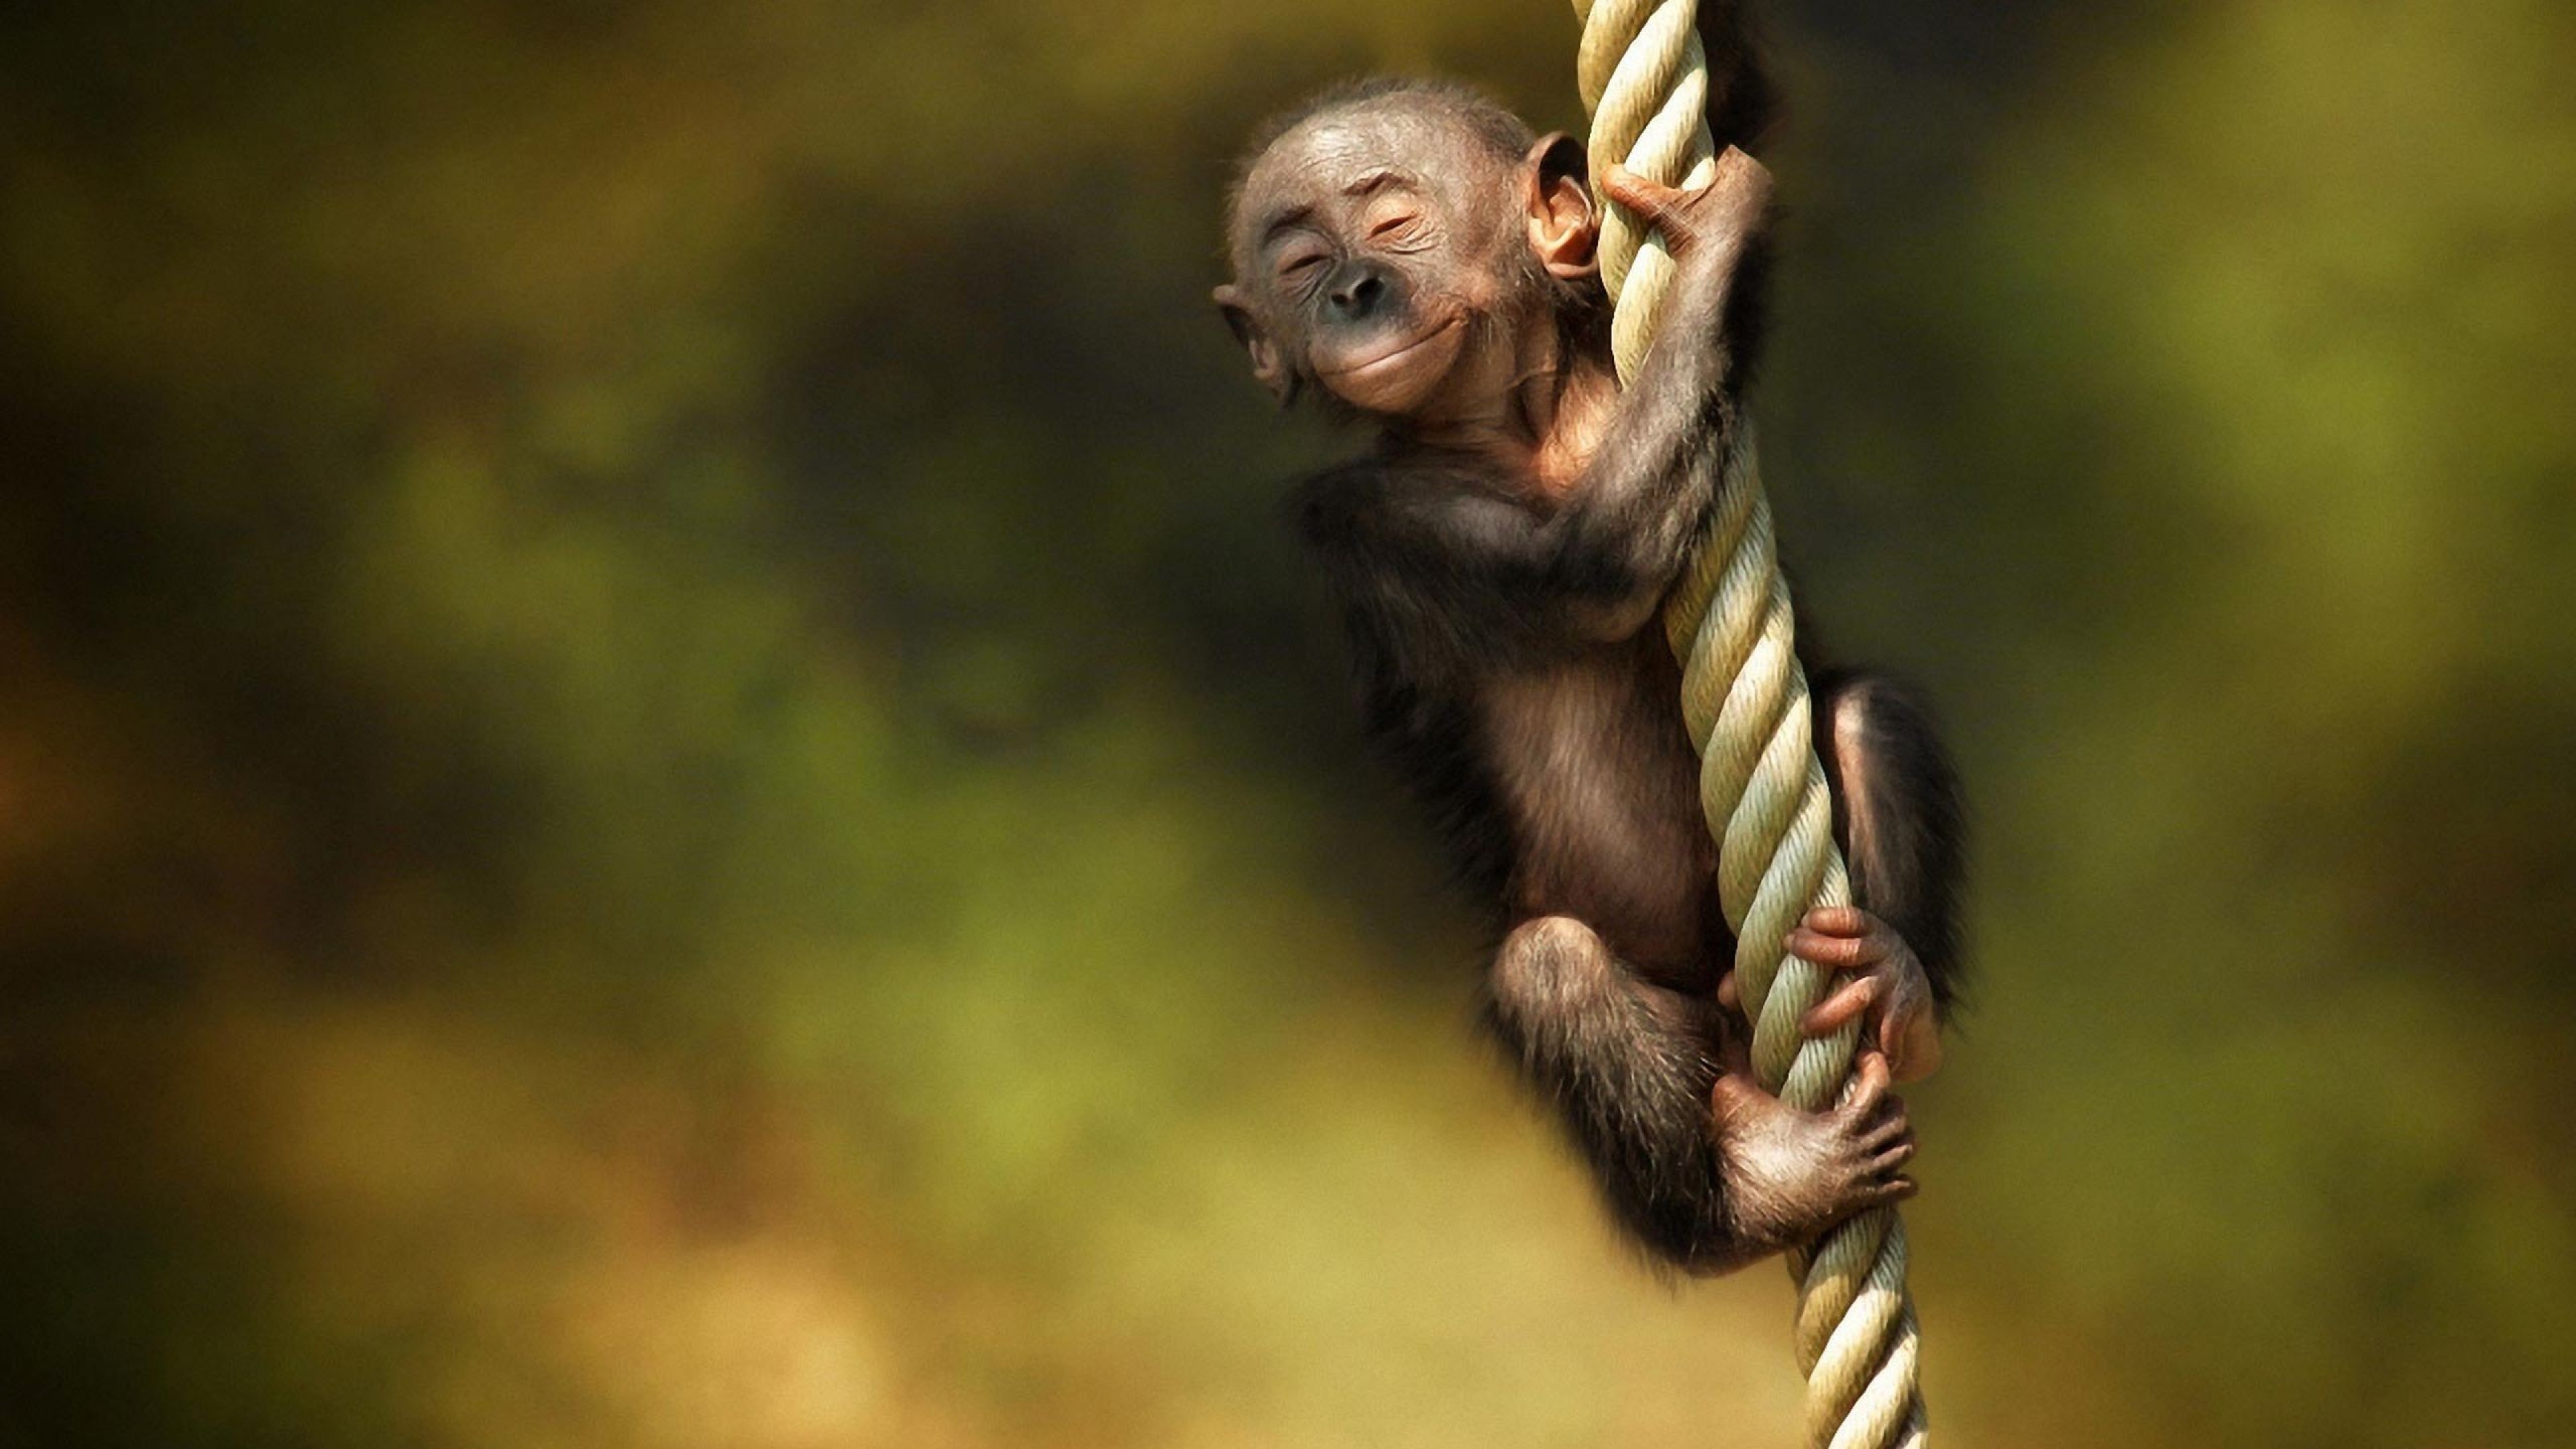 Cute Monkey Wallpaper 52 pictures